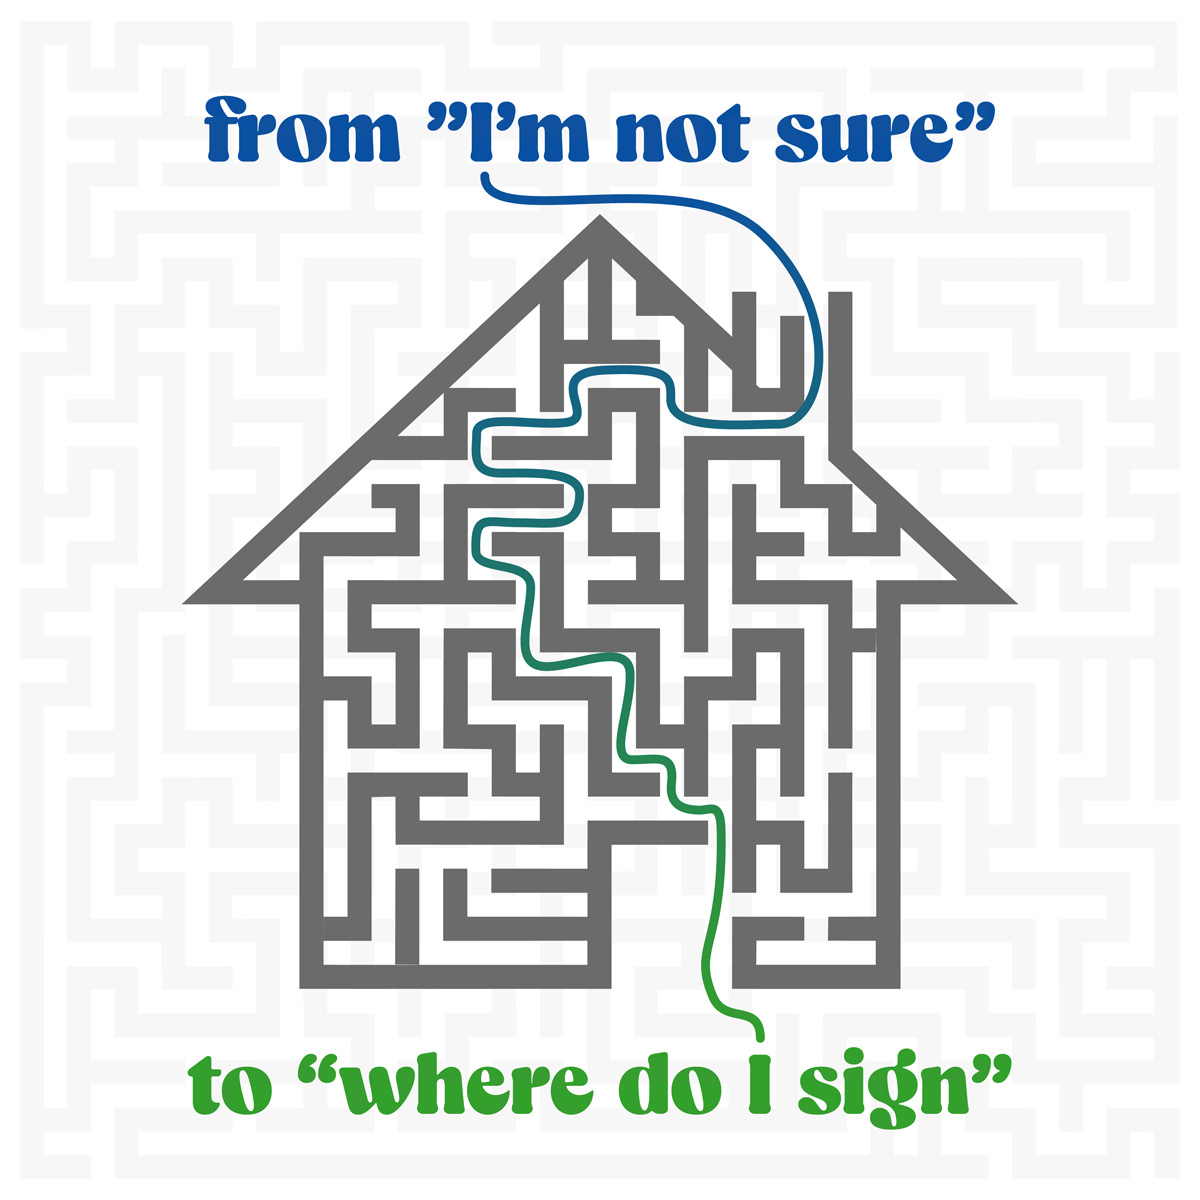 Homebuying can feel like learning a new language, but don't fret! A mortgage broker is your personal translator, guiding you from 'I'm not sure' to 'Where do I sign?' No prior knowledge needed!
#Mortgage #Homebuyers #MortgageBroker #HomeLoans